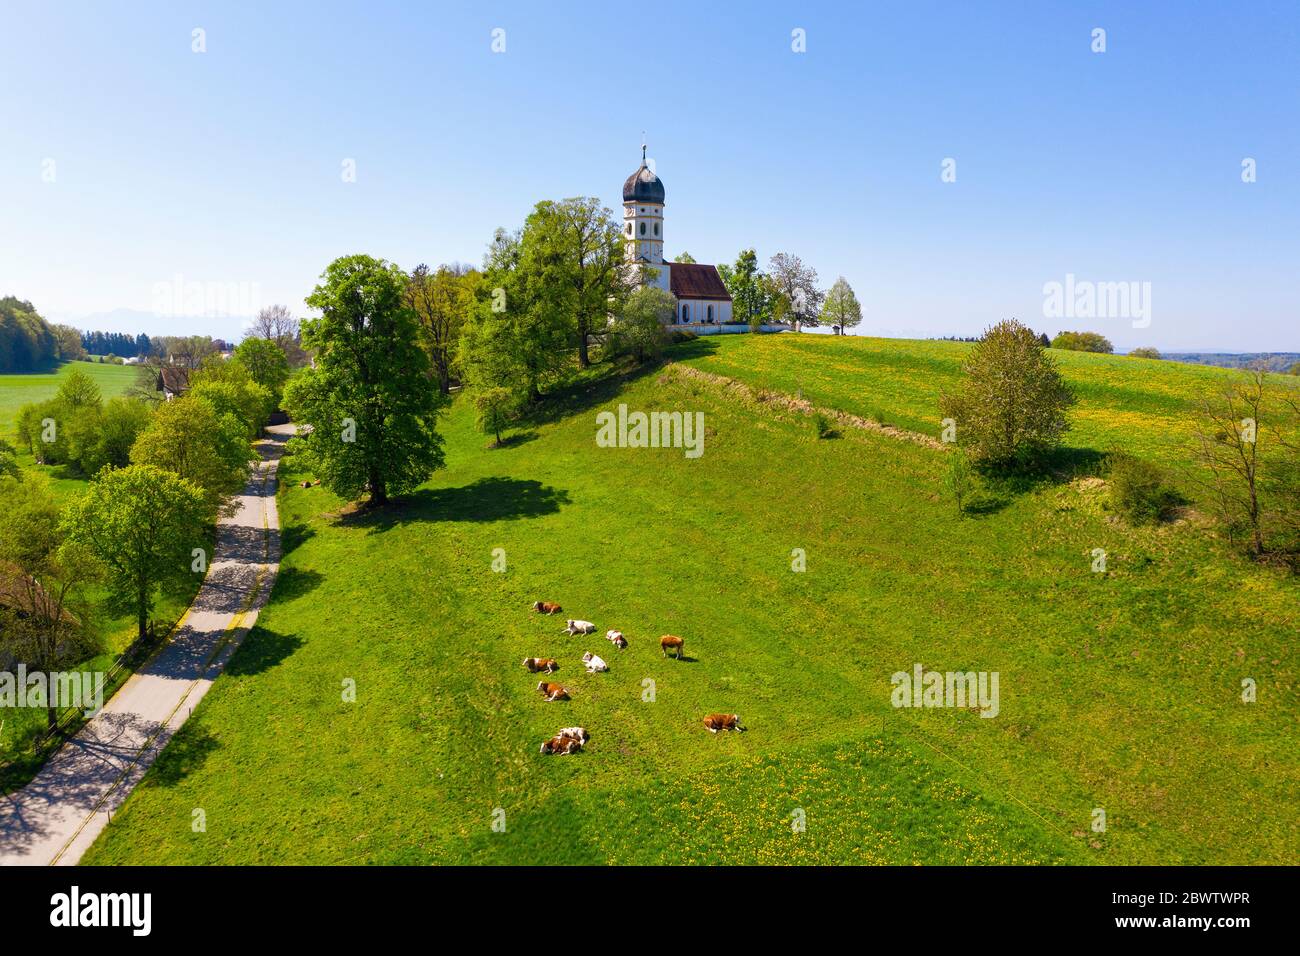 Germany, Bavaria, Munsing, Drone view of cattle grazing in front of Church of Assumption of Virgin Mary in spring Stock Photo